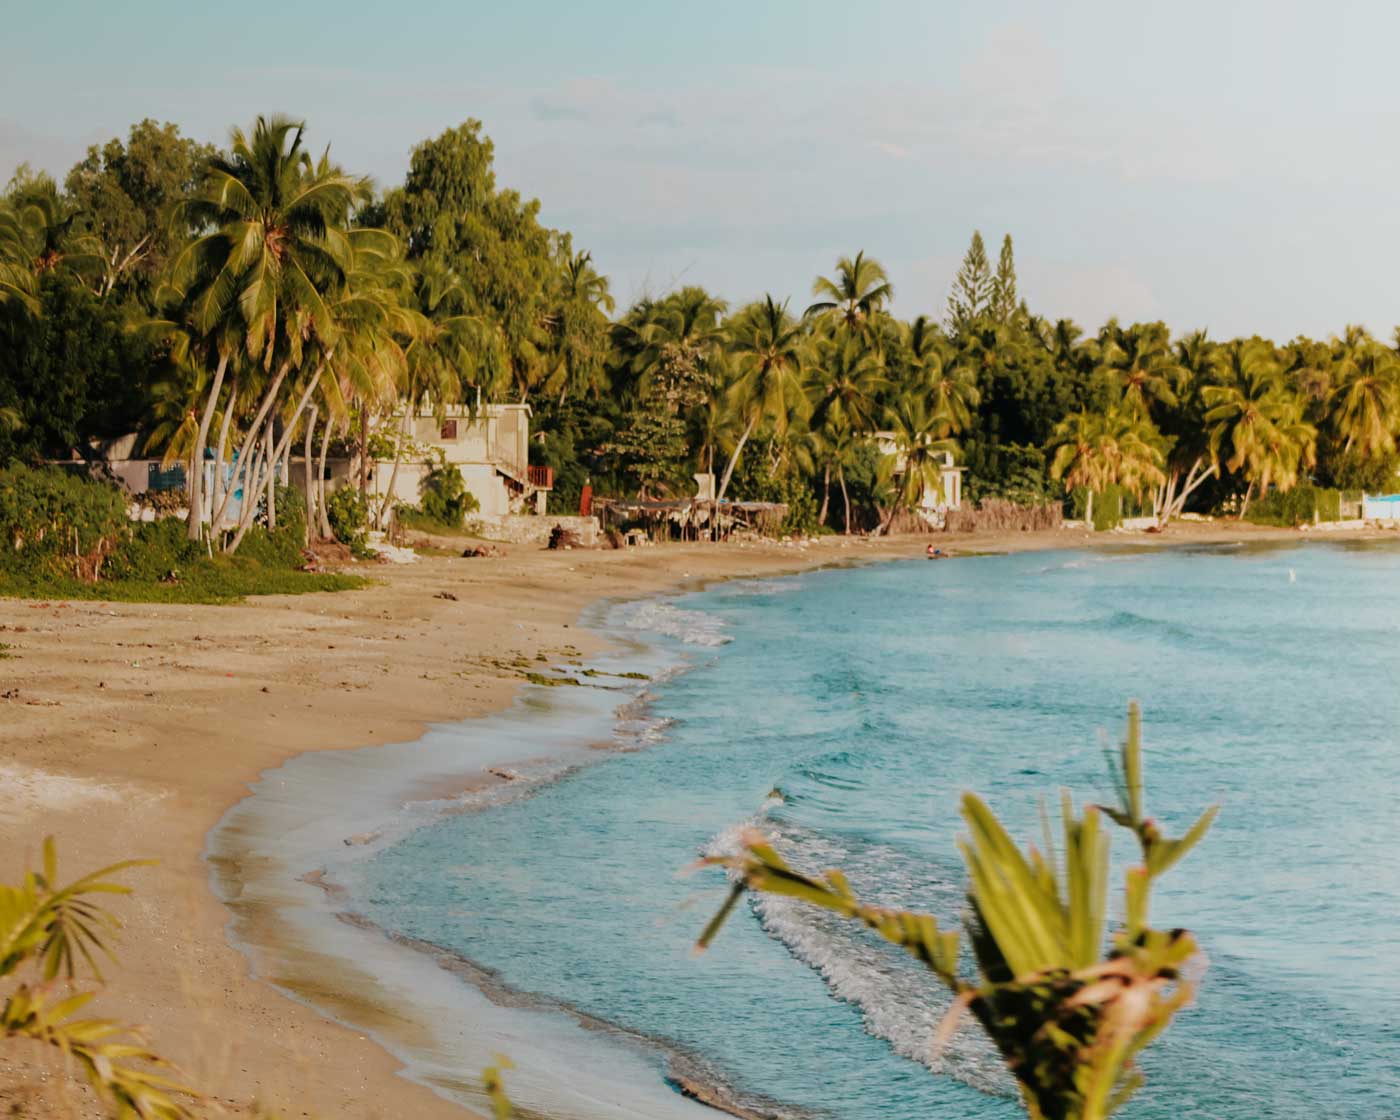 sand beach lined with palm trees in saint-marc